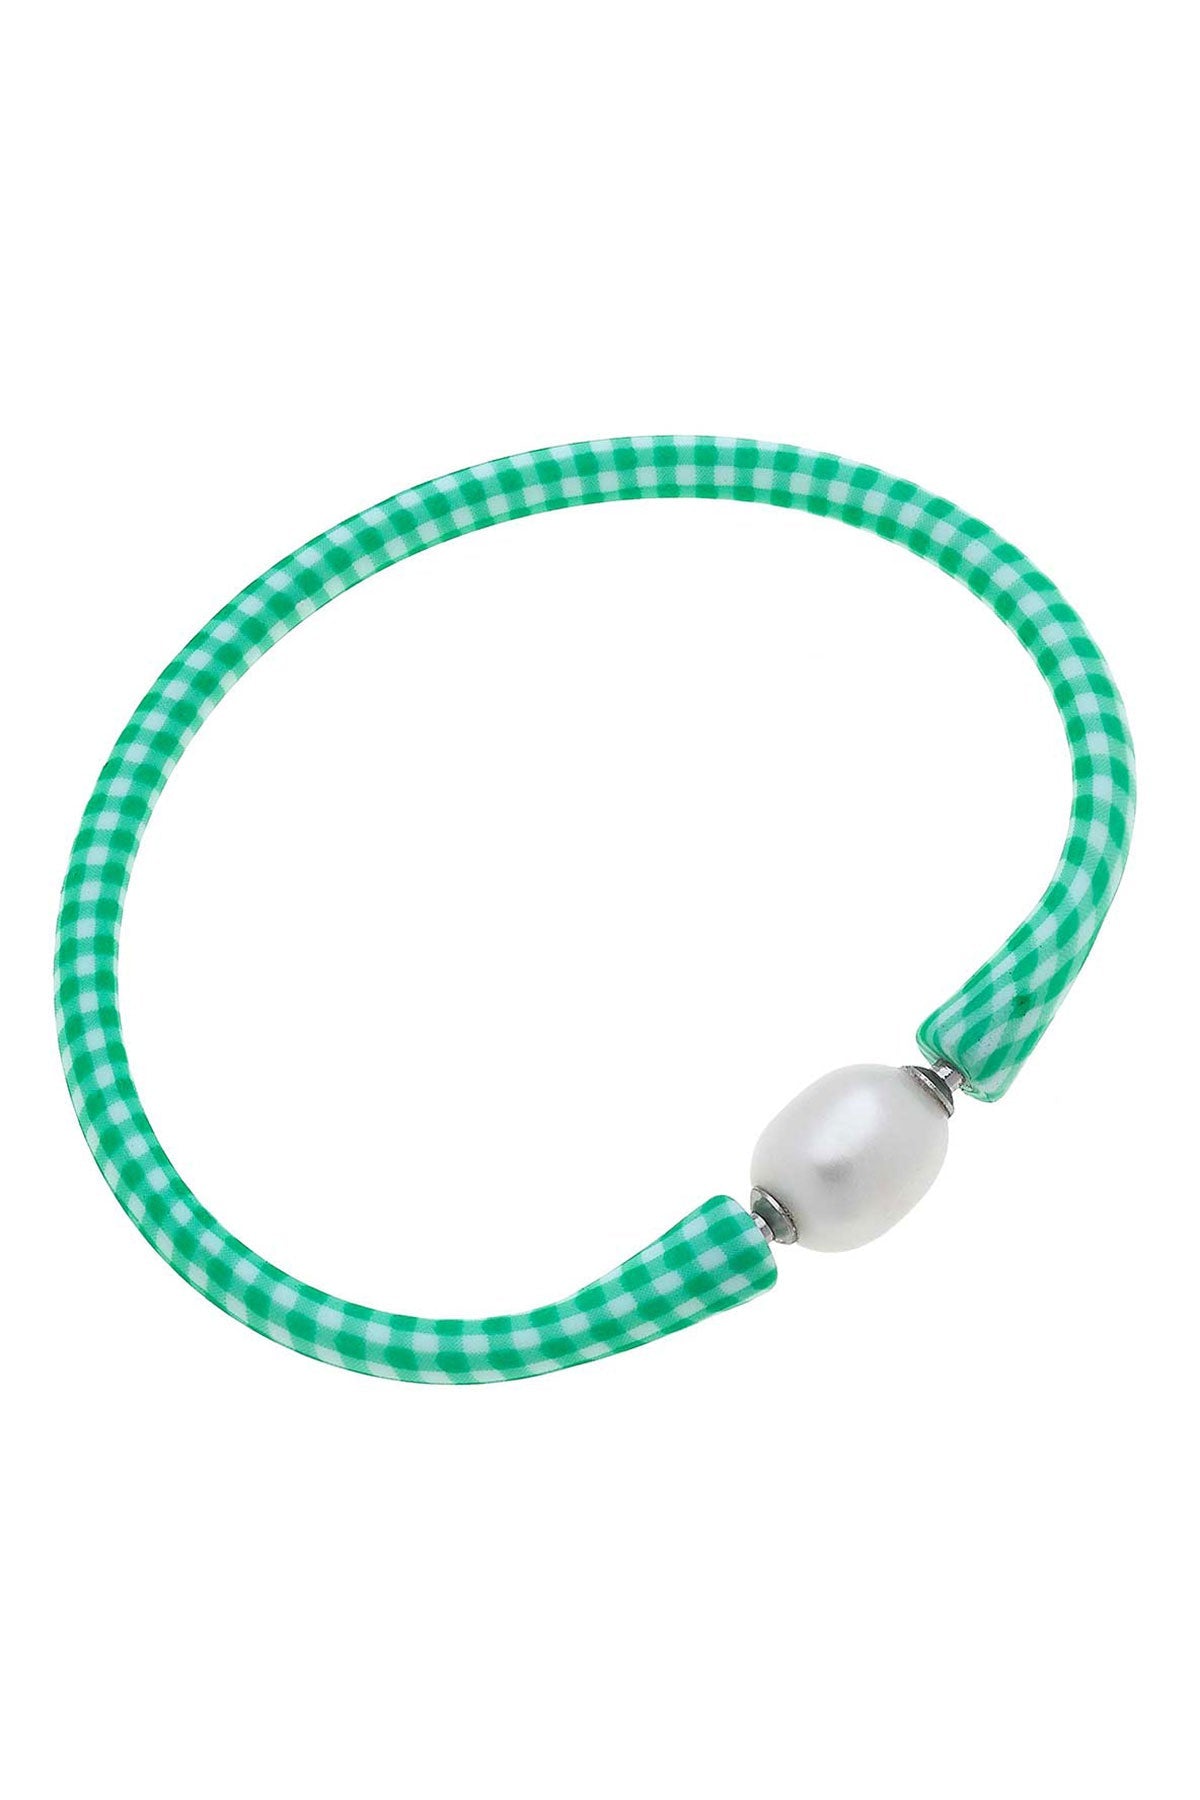 Bali Freshwater Pearl Silicone Bracelet in Green Gingham